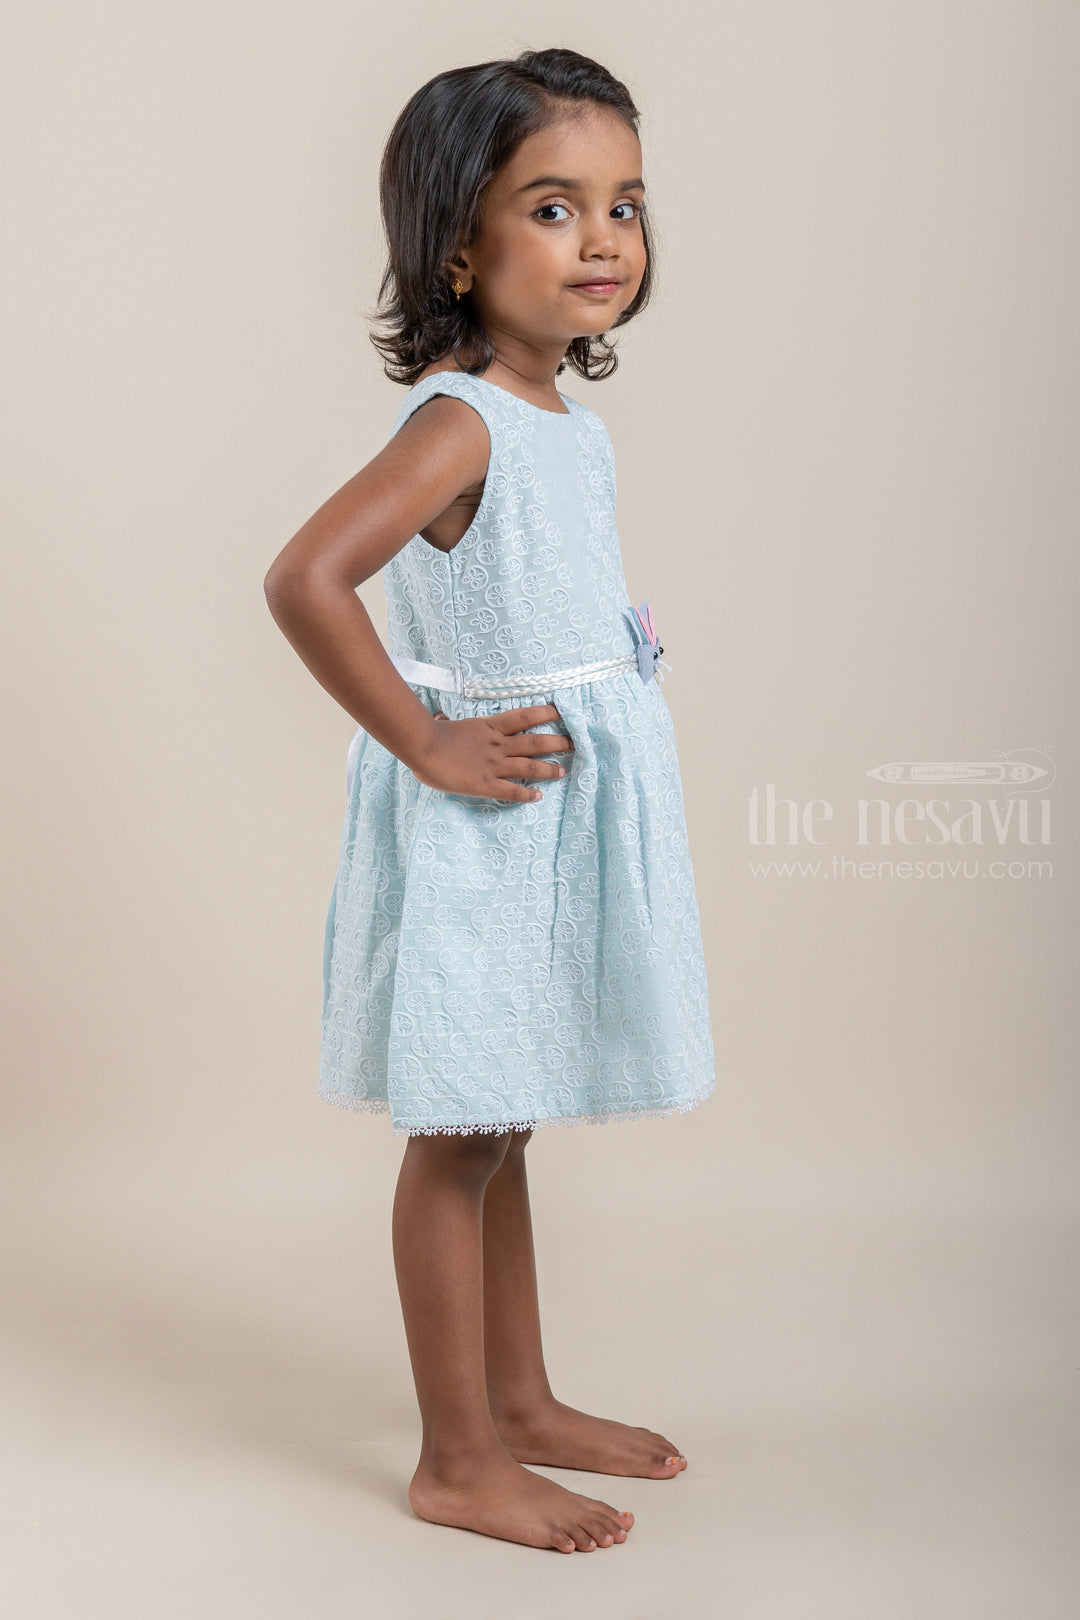 The Nesavu Baby Cotton Frocks All Over Floral Embroidered Green Bamboo Cotton Frock For Baby Girls Nesavu Floral Designer baby Frock | Cotton Dresses For Kids | The Nesavu